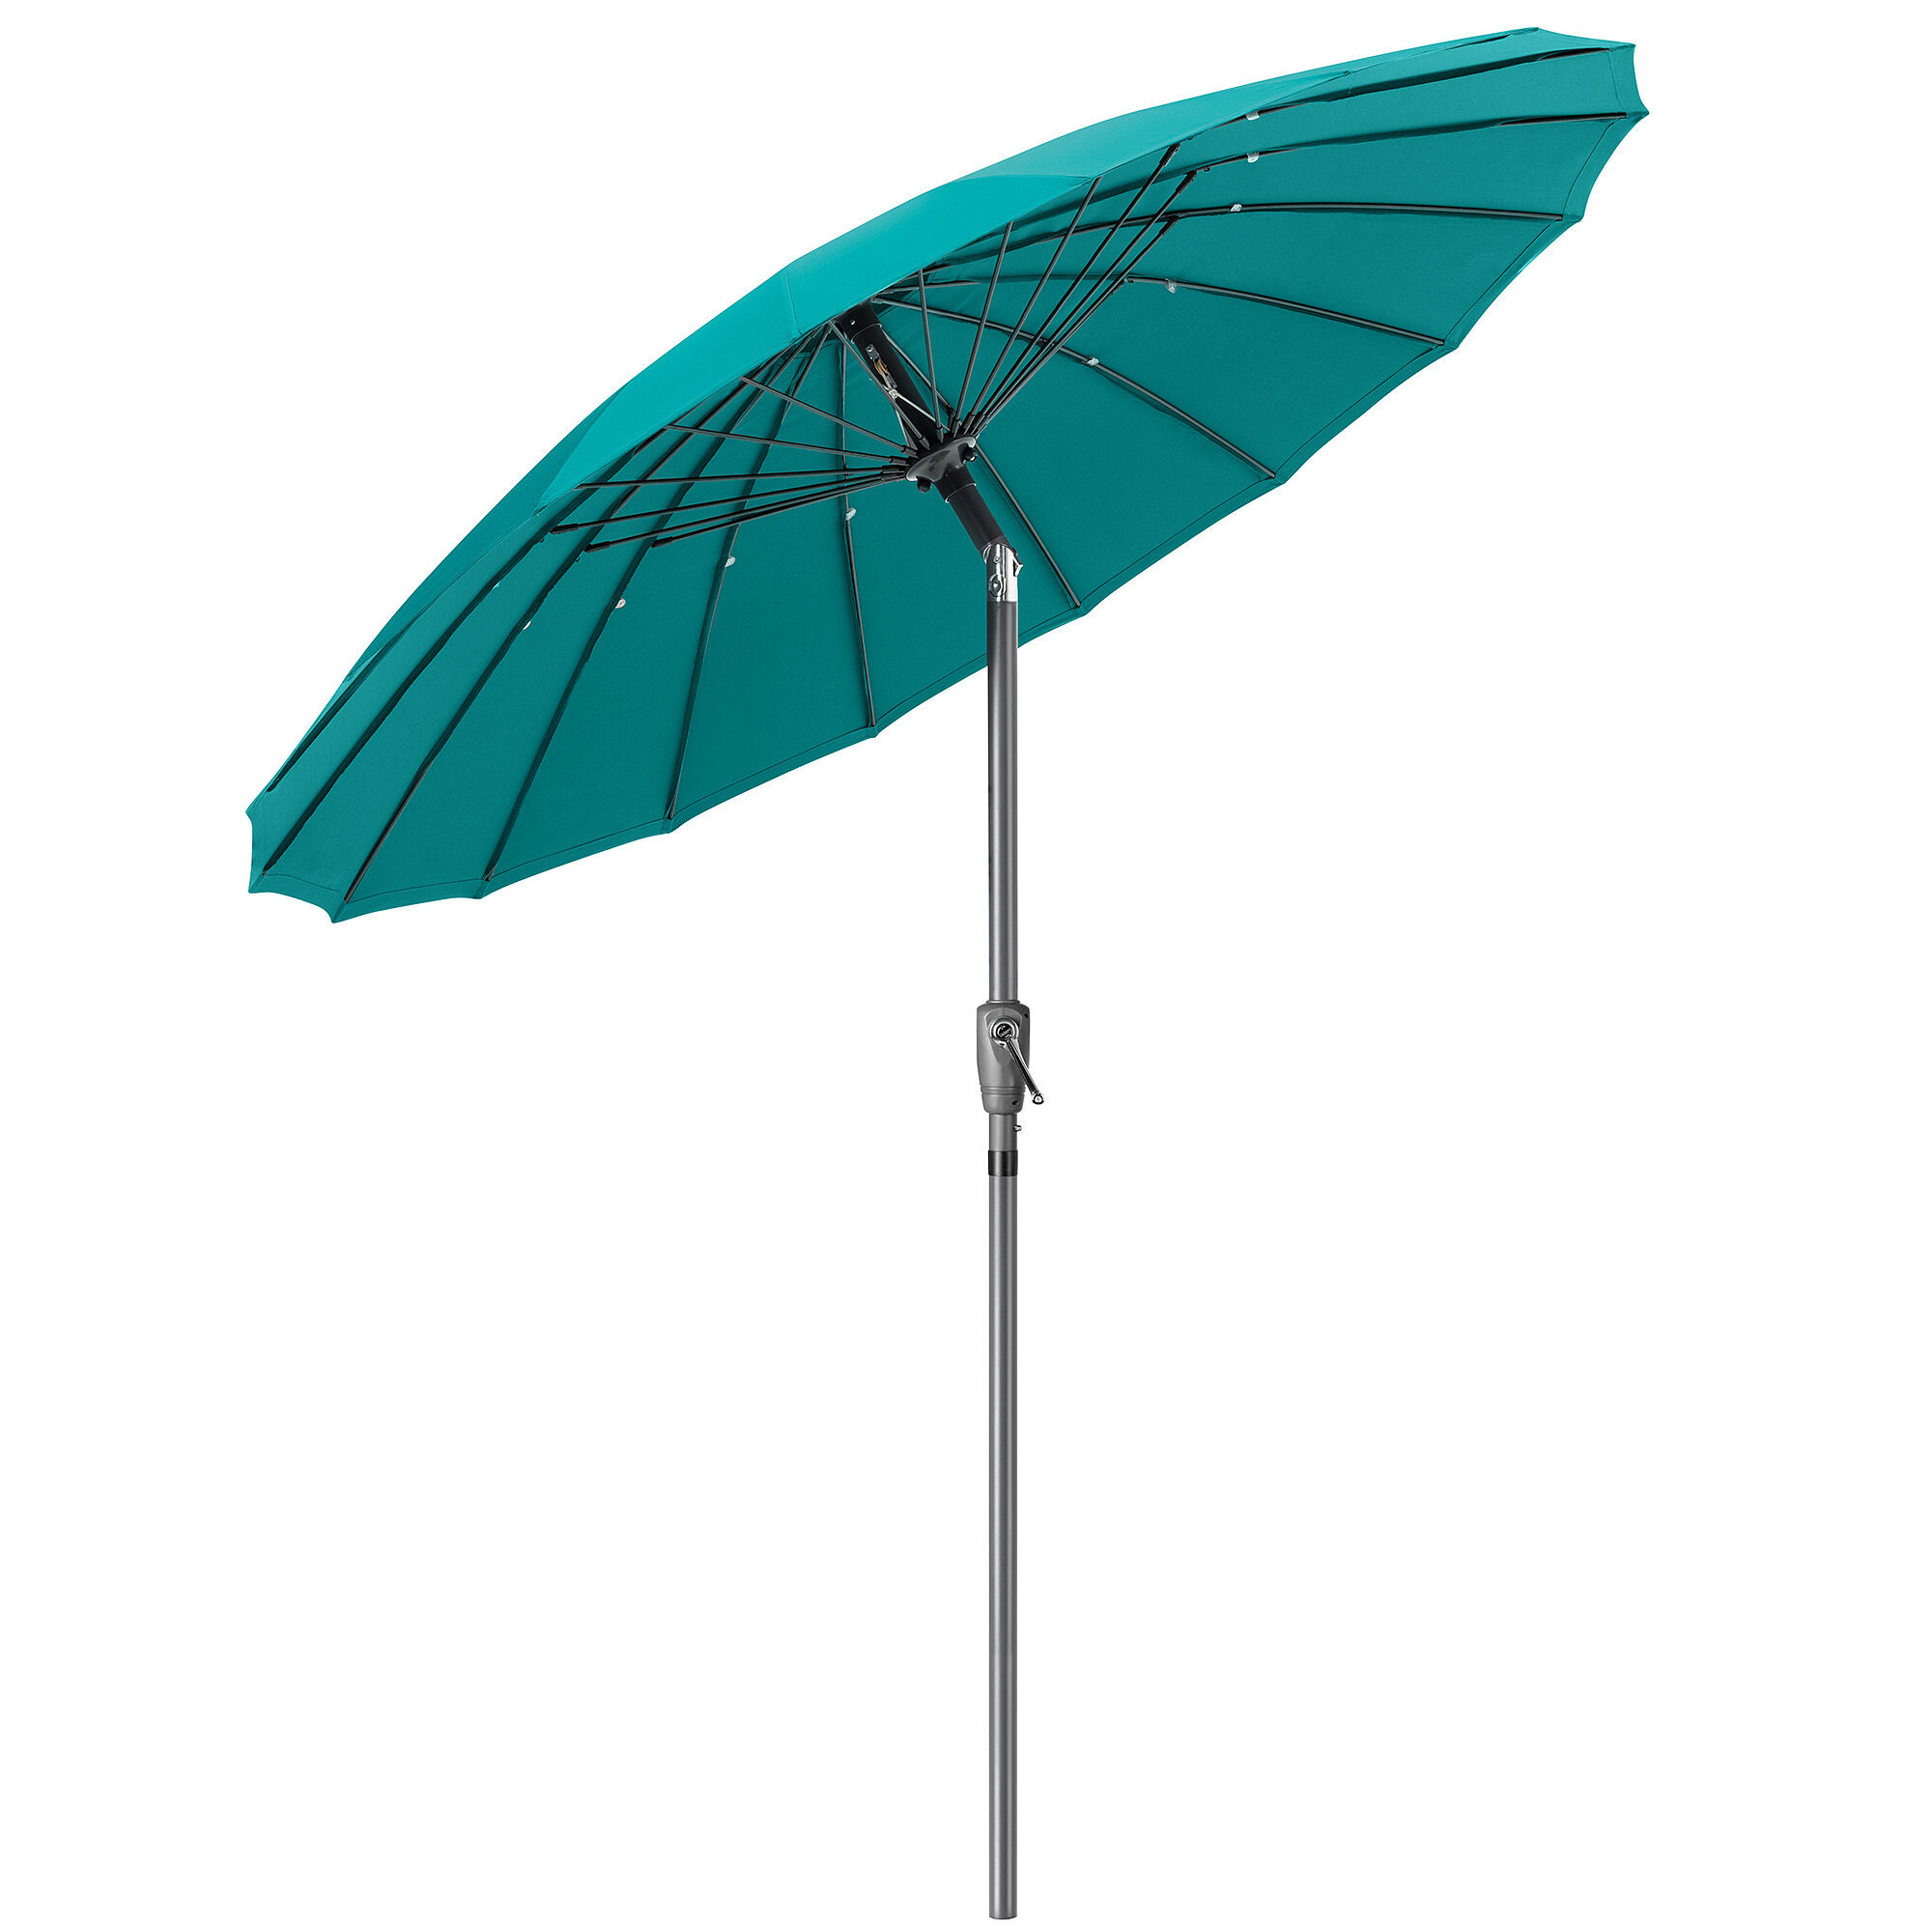 Christow Shanghai Parasol With Tilt 2m - Turquoise